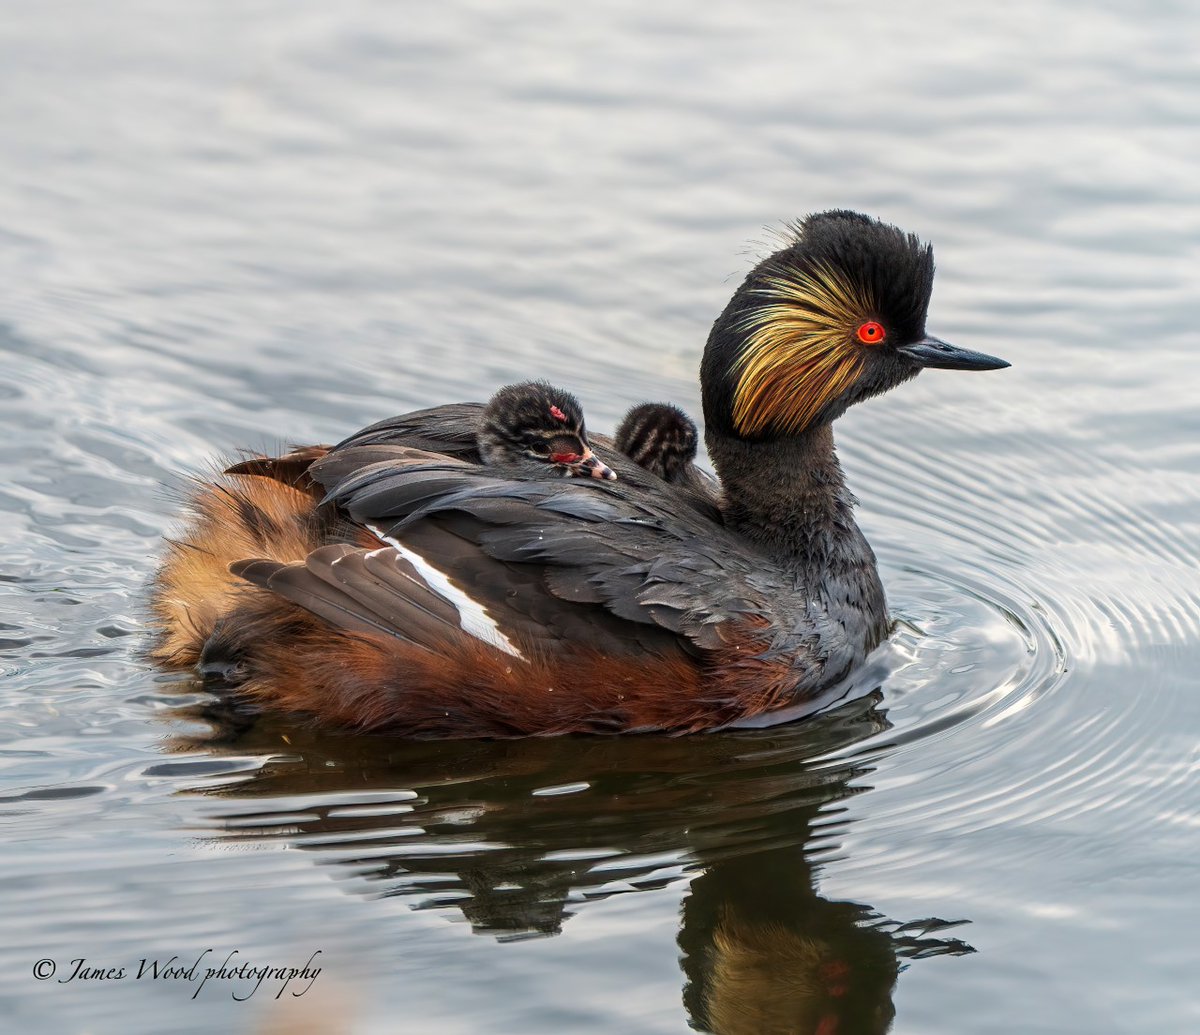 Join us for a once-in-a-lifetime experience at #RSPBStAidans! 🦆 Our Specialist Black Necked Grebe walk awaits, where you'll discover these stunning birds in their natural habitat as our knowledgeable wardens guide you through their world: events.rspb.org.uk/browse?filter[… 📸|James Wood